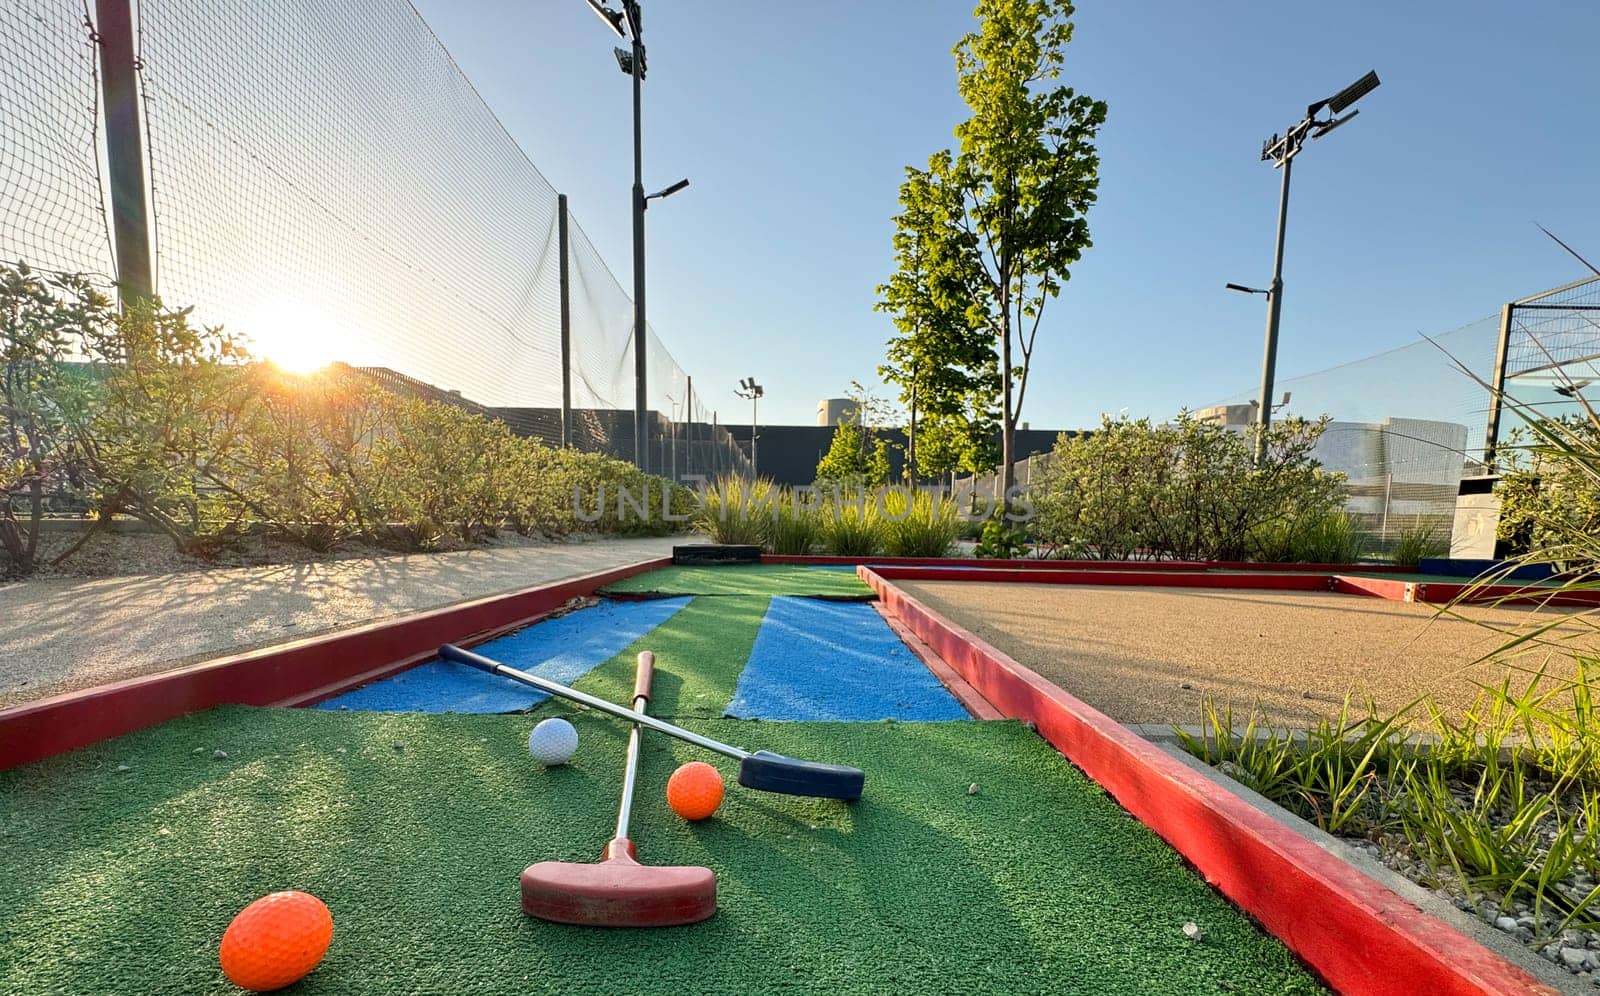 Mini-golf clubs and balls of different colors laid on artificial grass. High quality photo